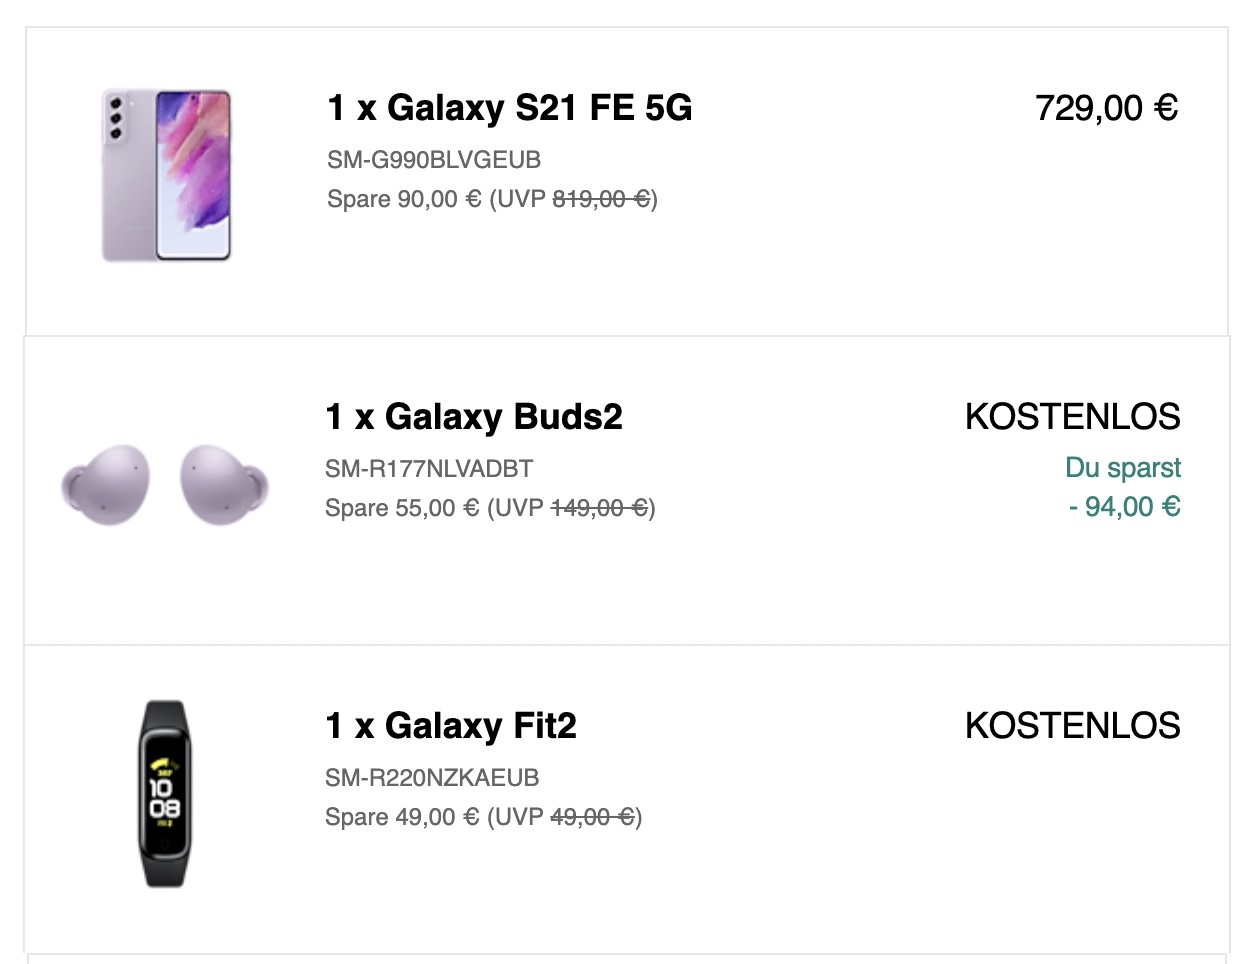 samsung bundle screenshot showing Galaxy S21 FE, with Galaxy Buds2 and Galaxy Fit2 bundled for free